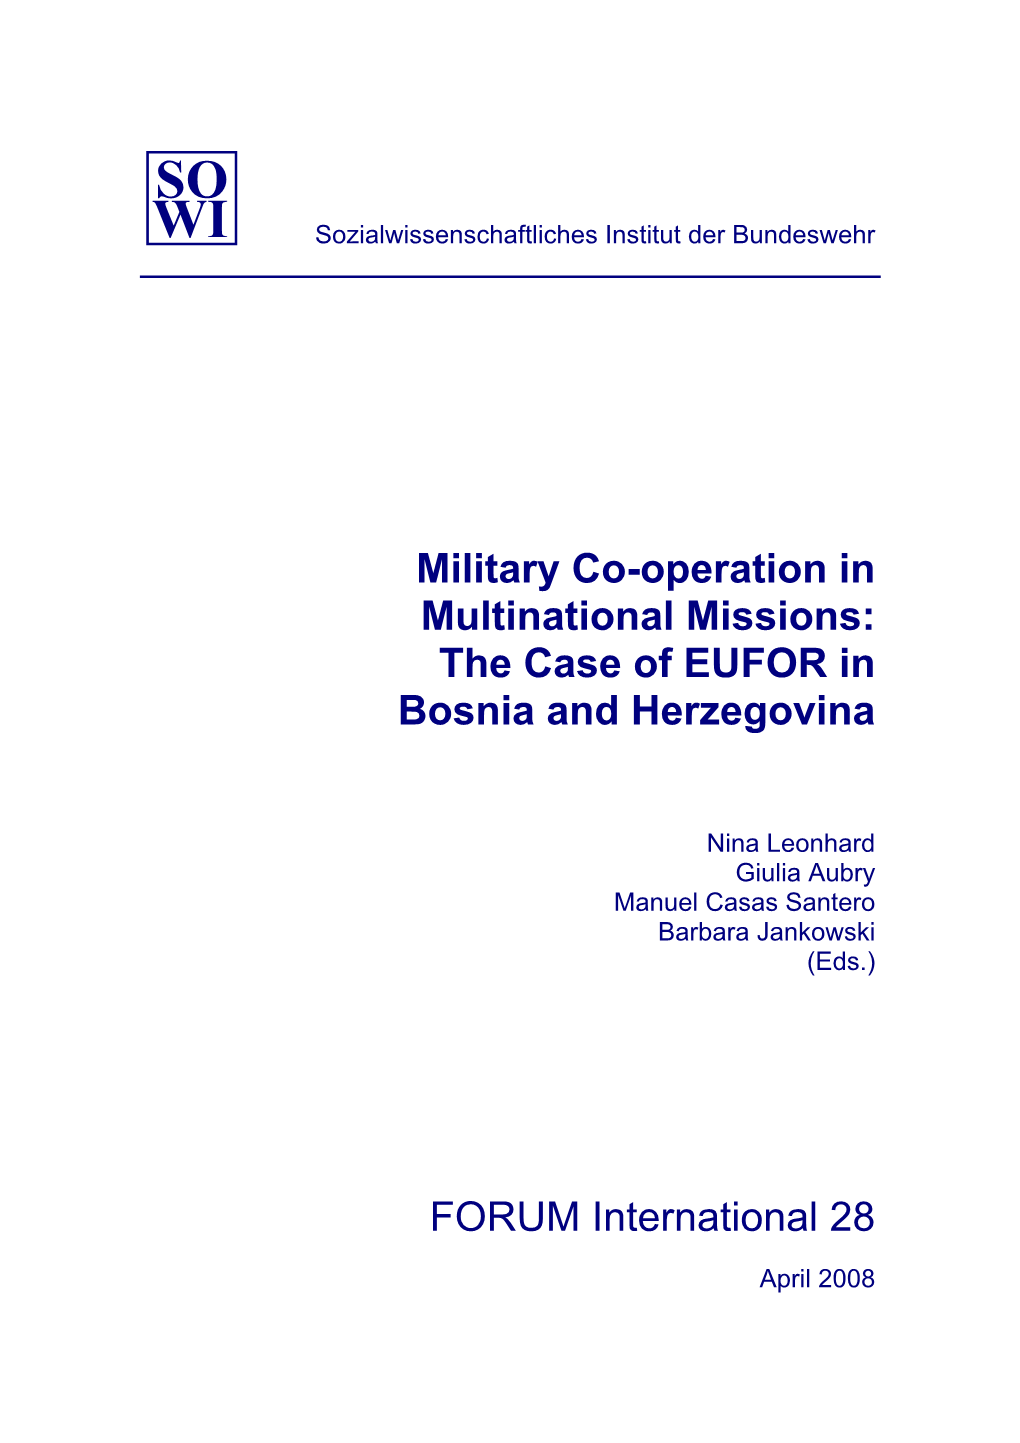 Military Co-Operation in Multinational Missions: the Case of EUFOR in Bosnia and Herzegovina